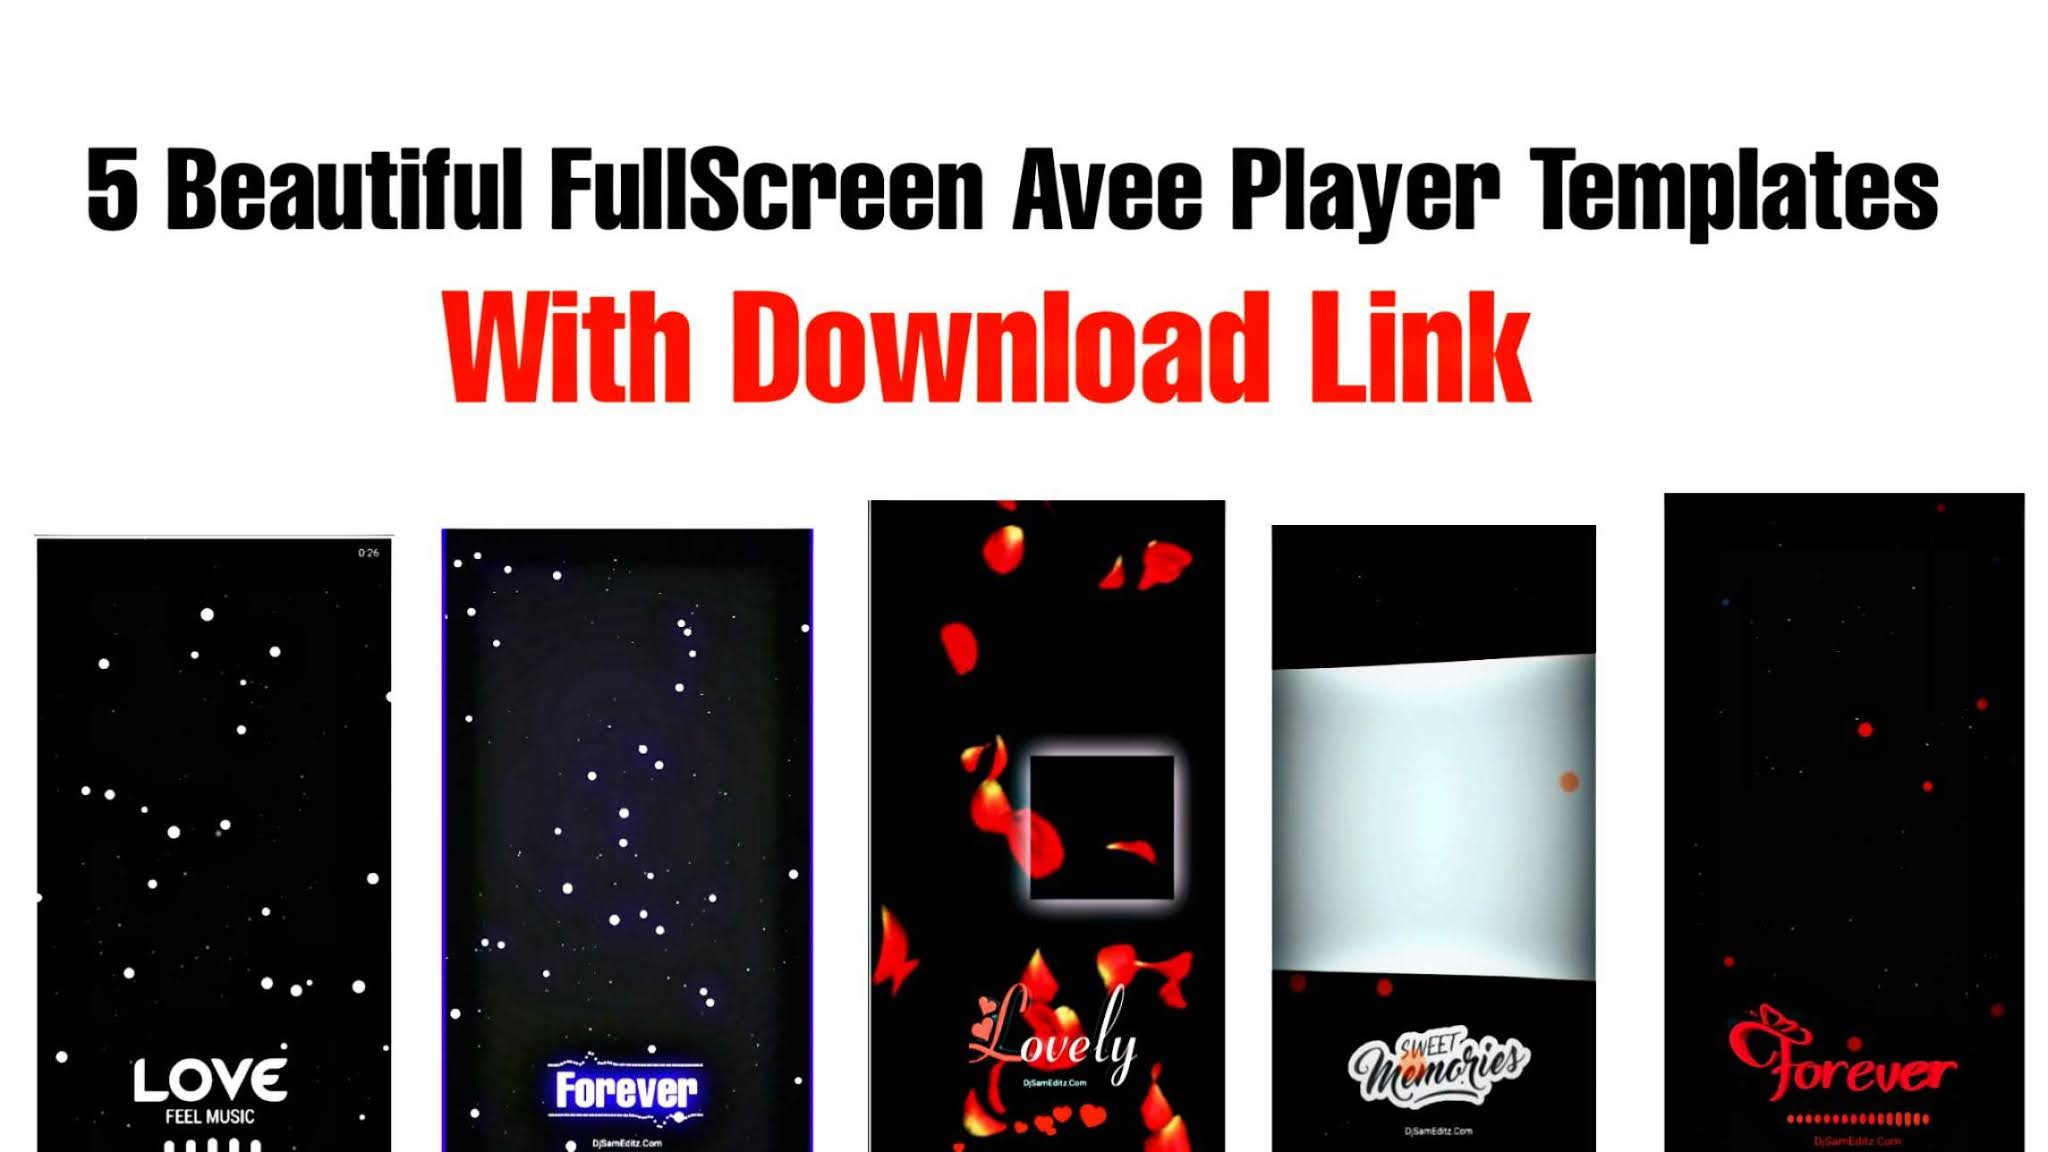 avee player template download, template download